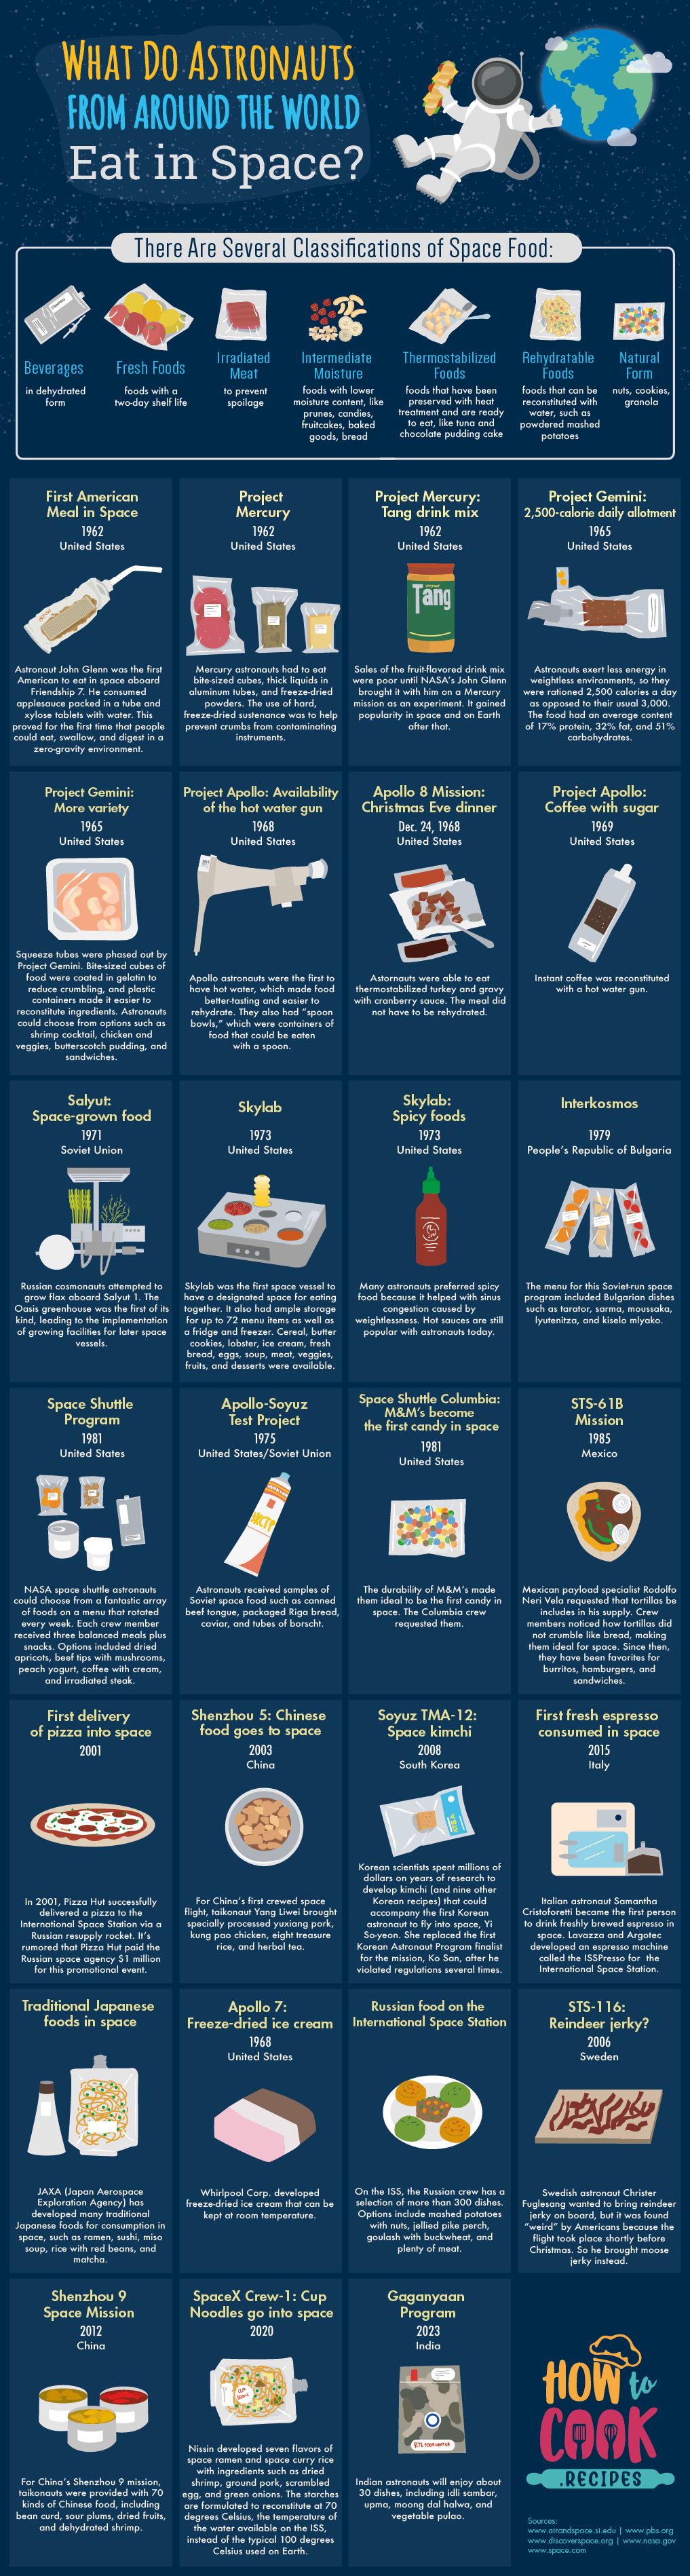 What Do Astronauts From Around The World Eat in Space?